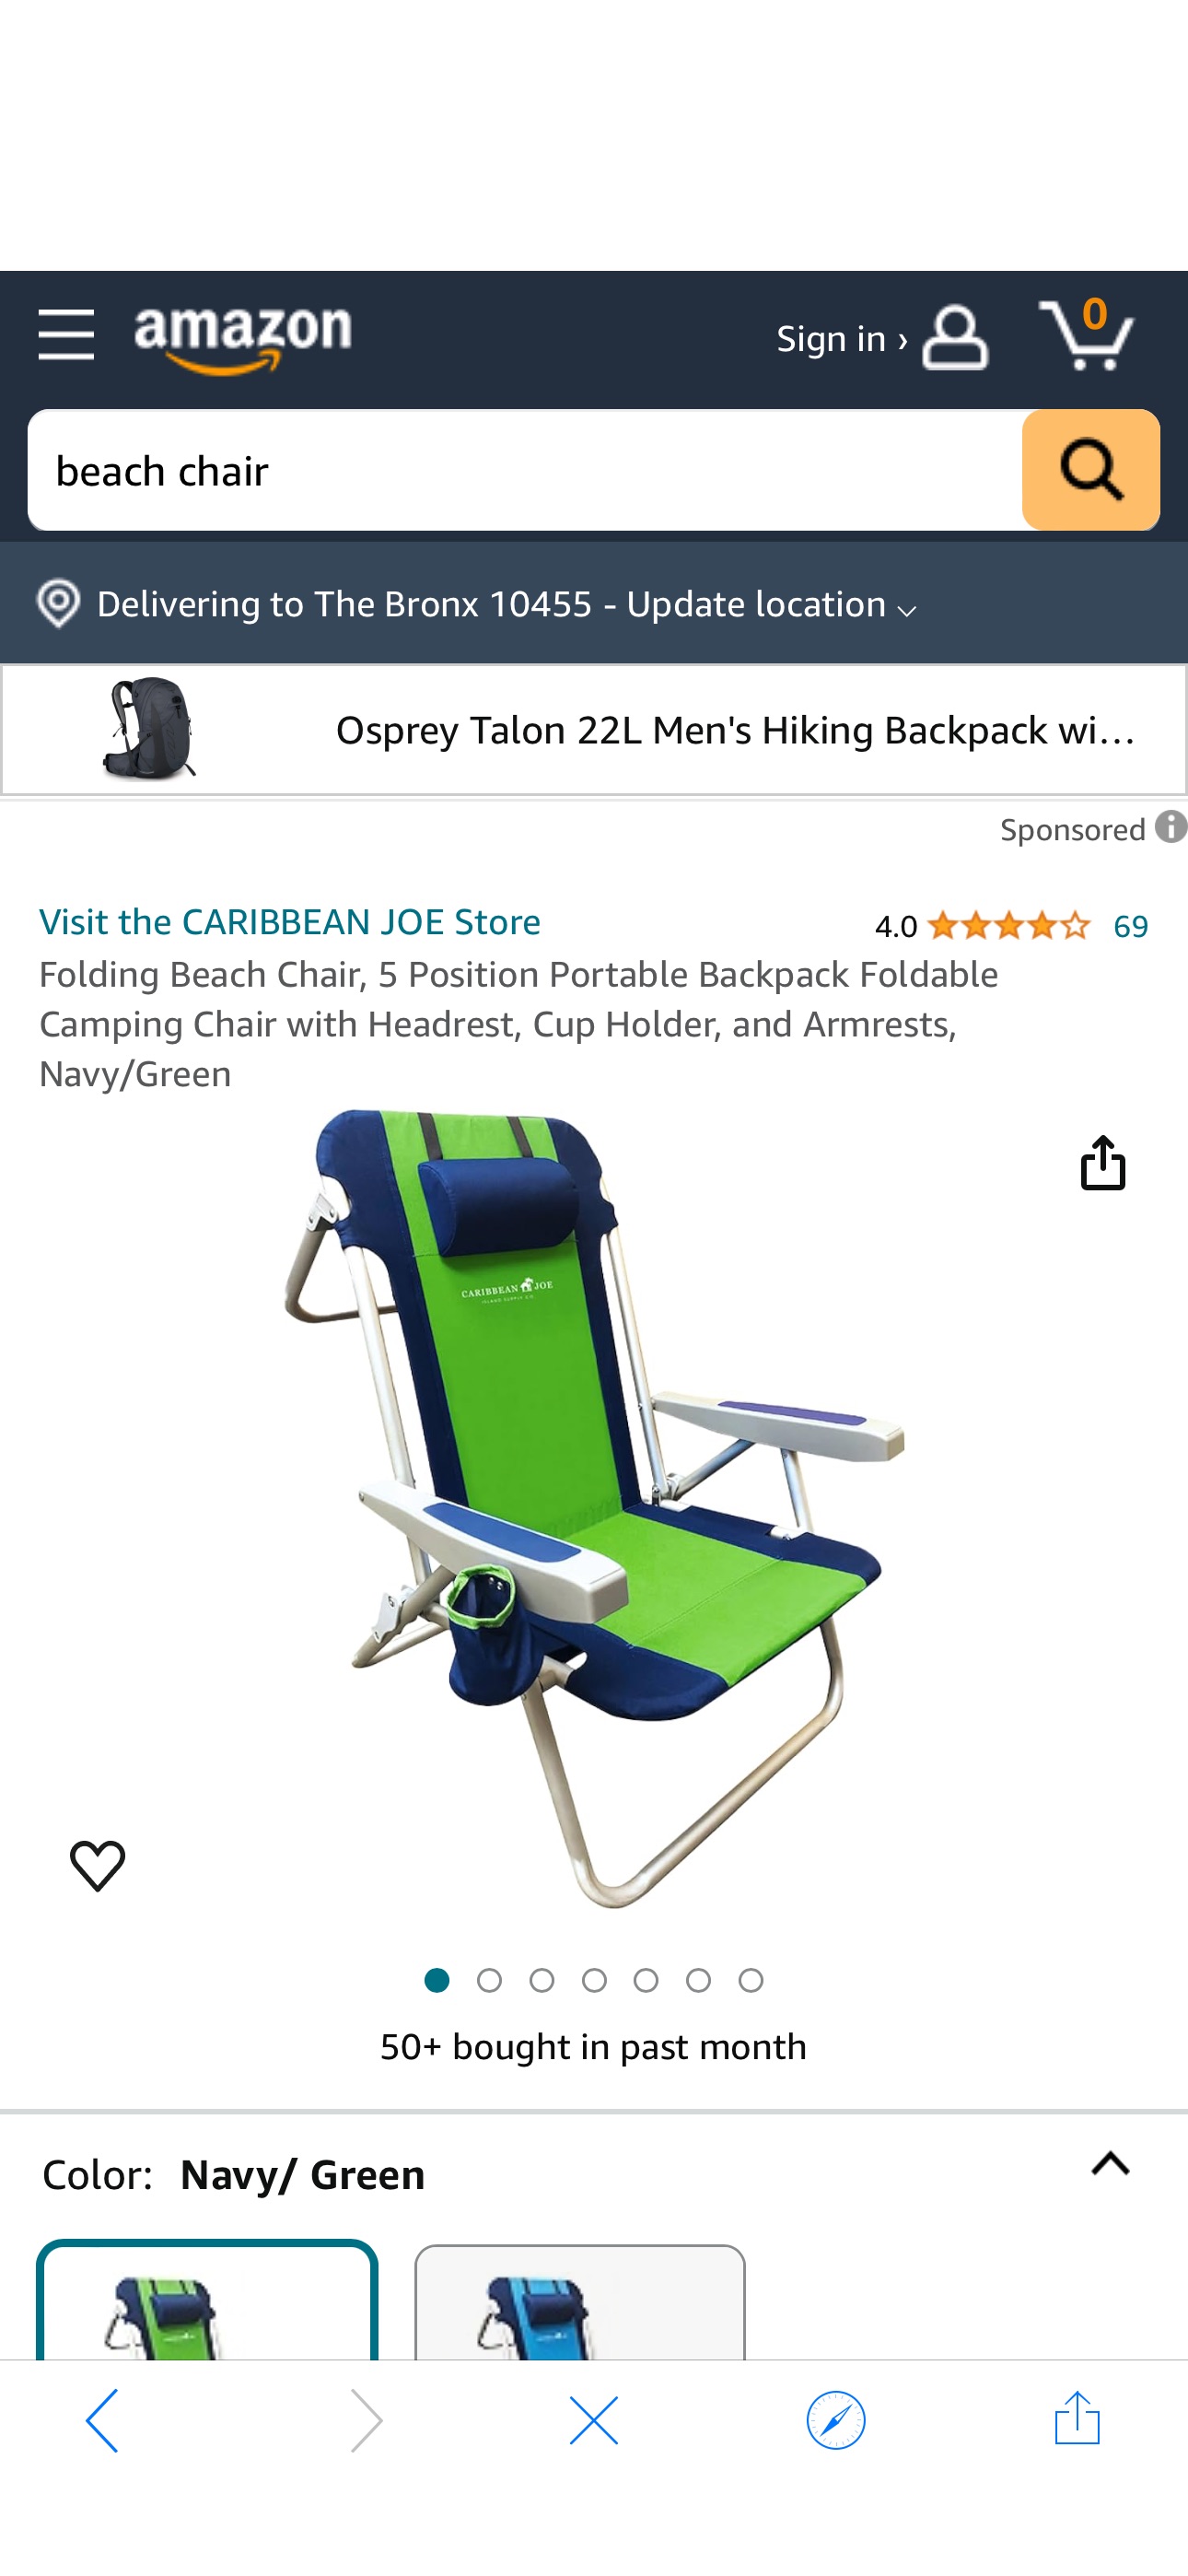 Amazon.com: CARIBBEAN JOE Folding Beach Chair, 5 Position Portable Backpack Foldable Camping Chair with Headrest, Cup Holder, and Armrests, Navy/Green : Everything Else